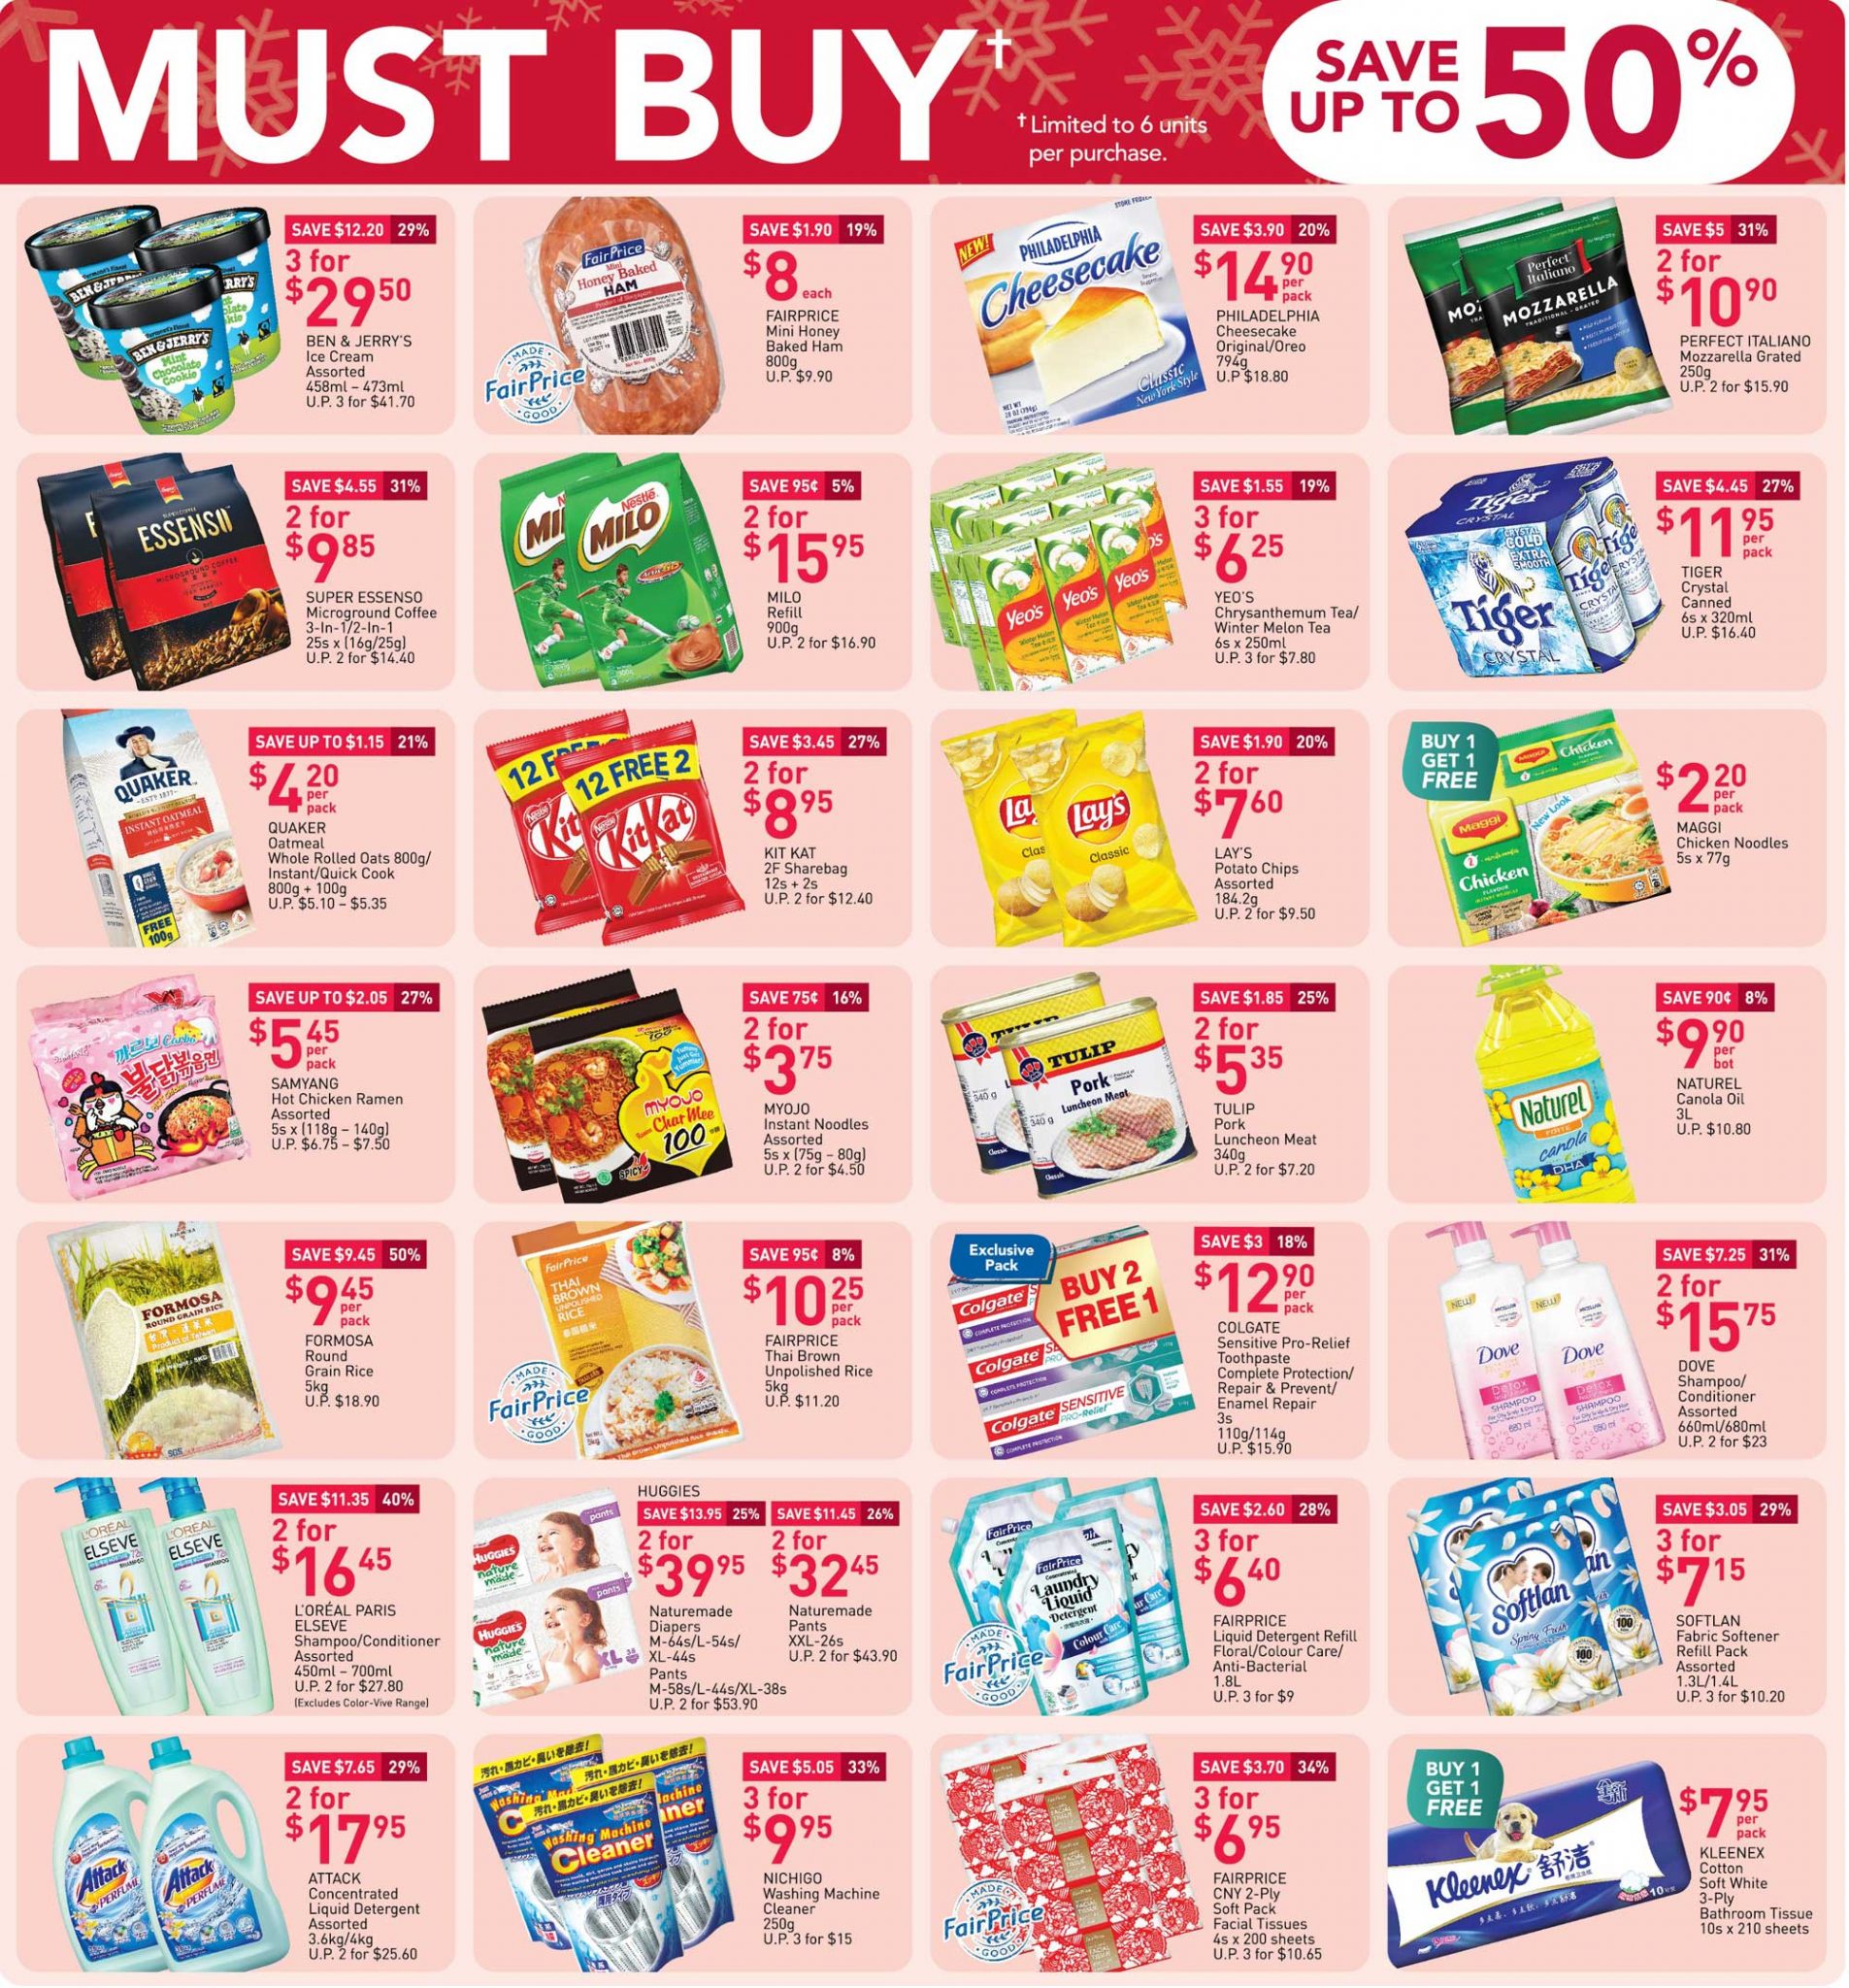 FairPrice must-buy items from now till 23 December 2020